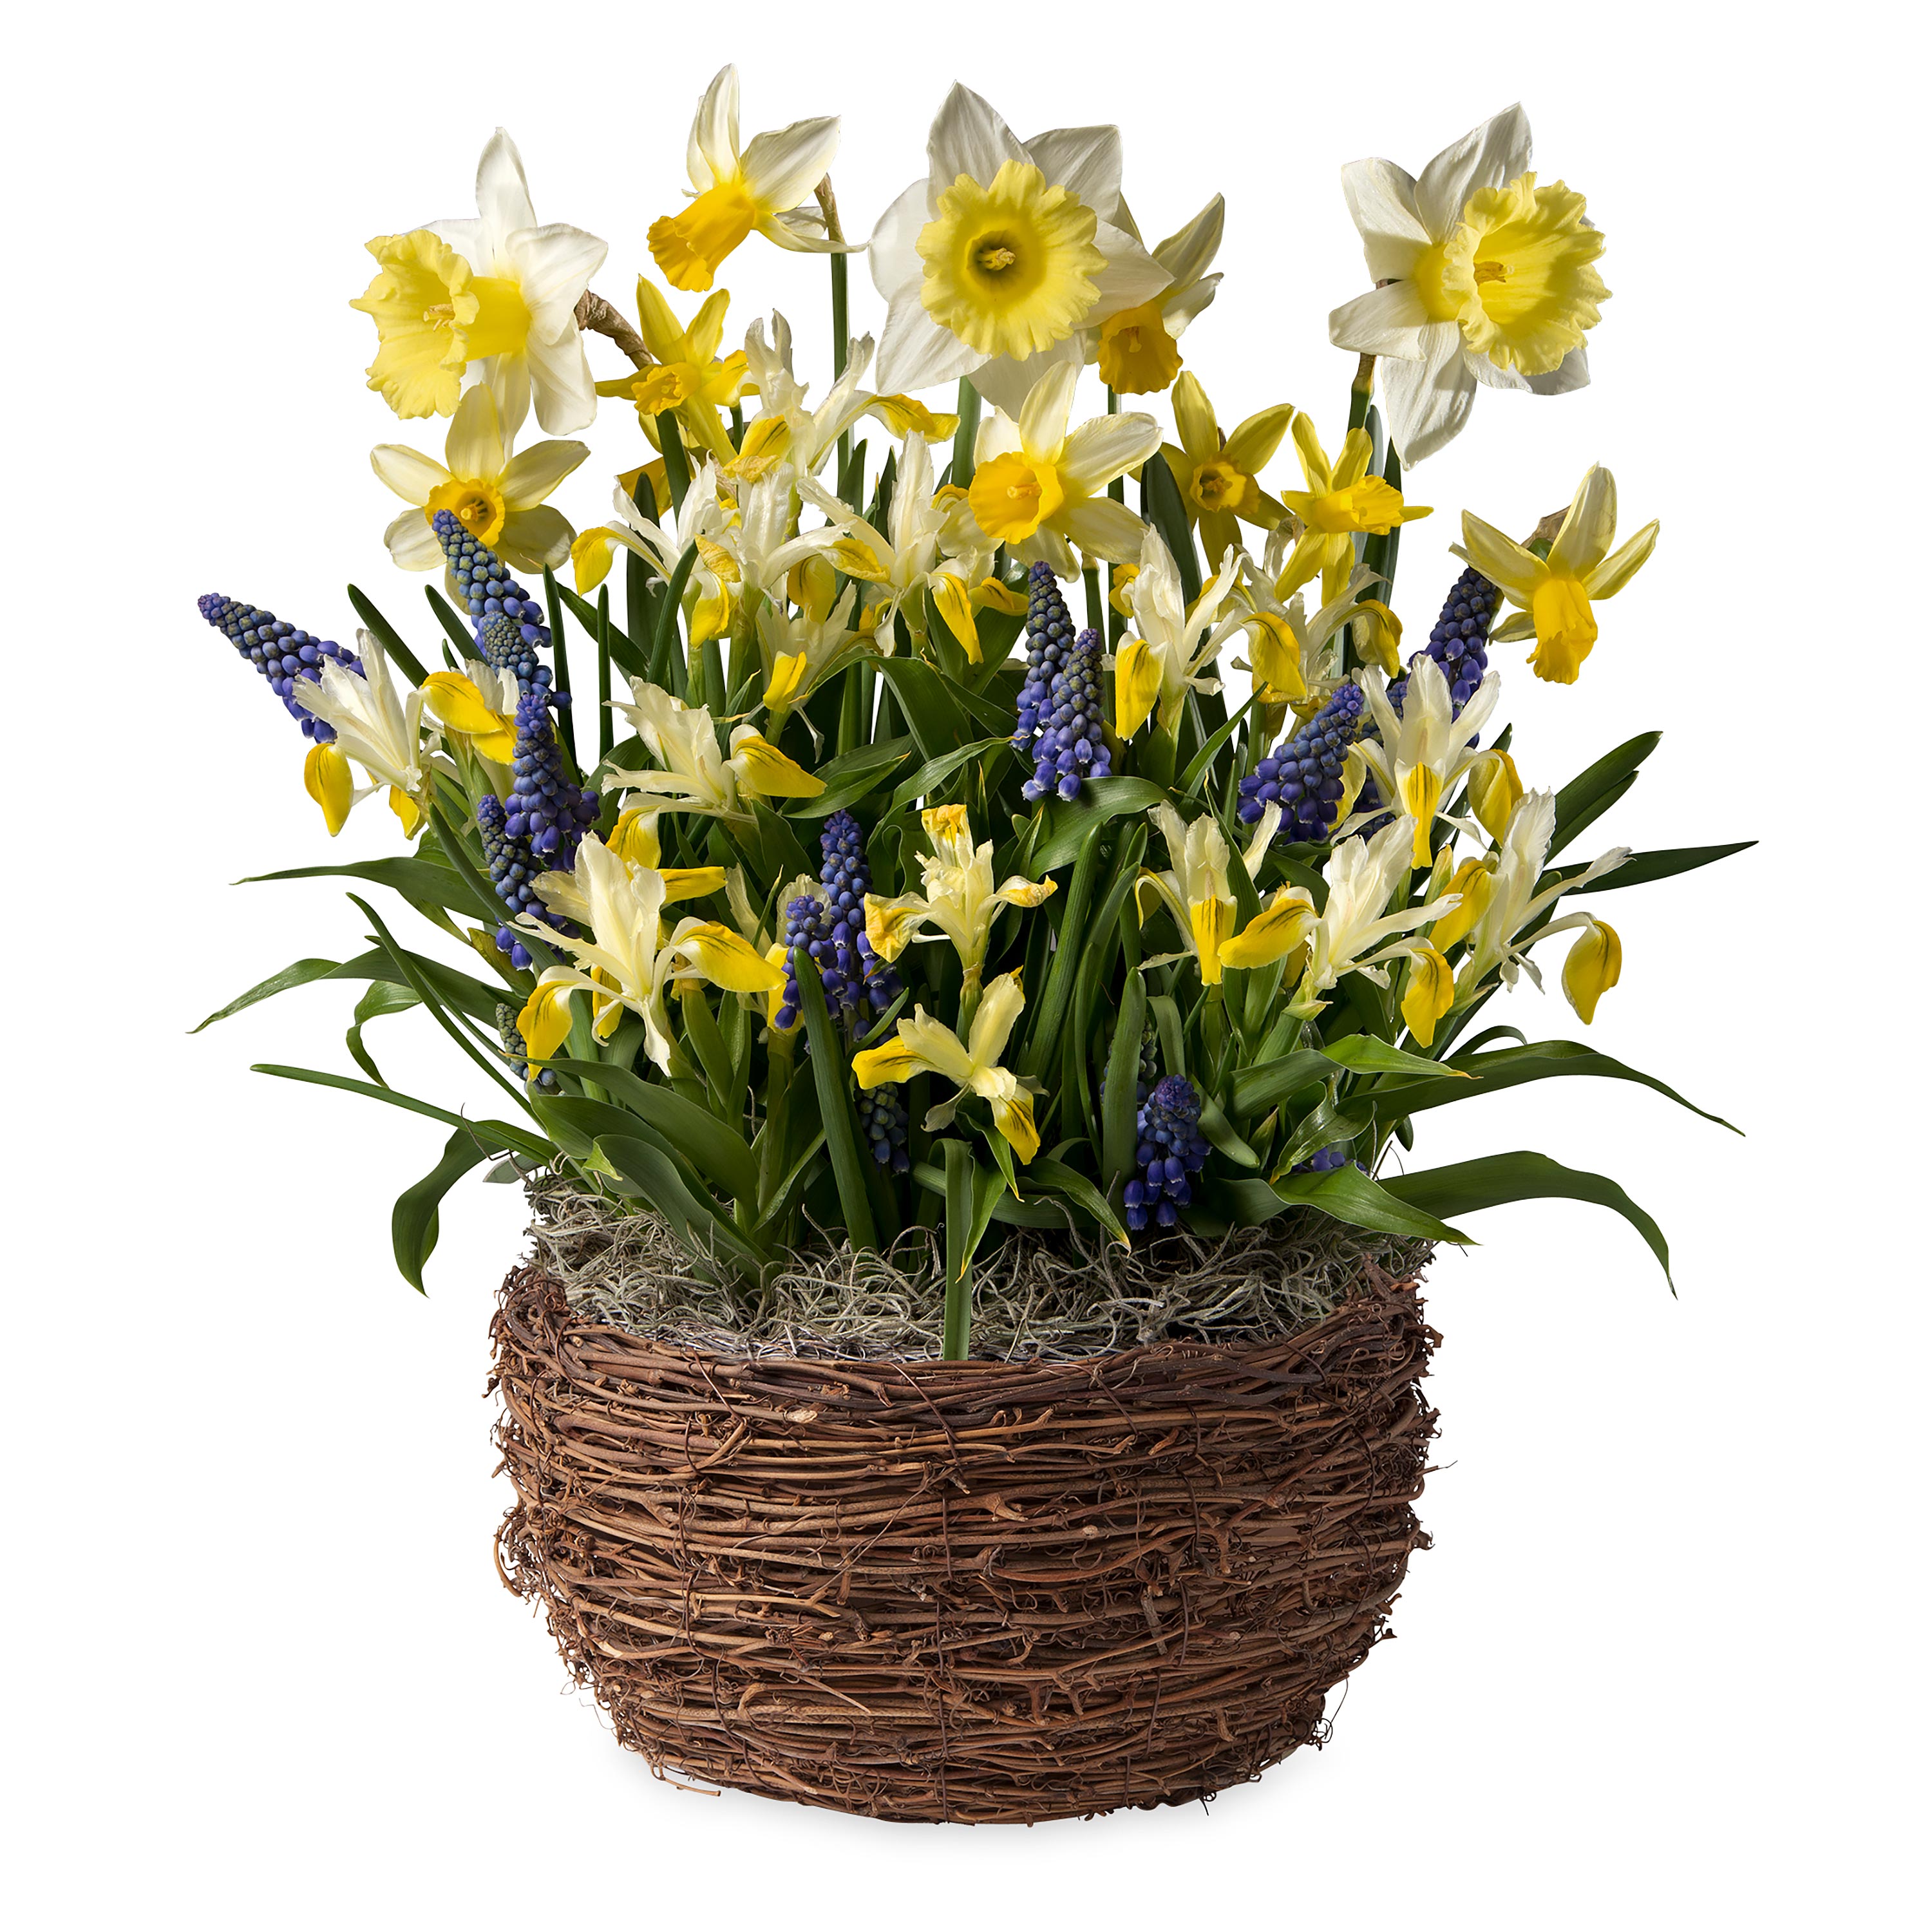 Narcissus, Tulips and Grape Hyacinths Flower Bulb Gift Garden